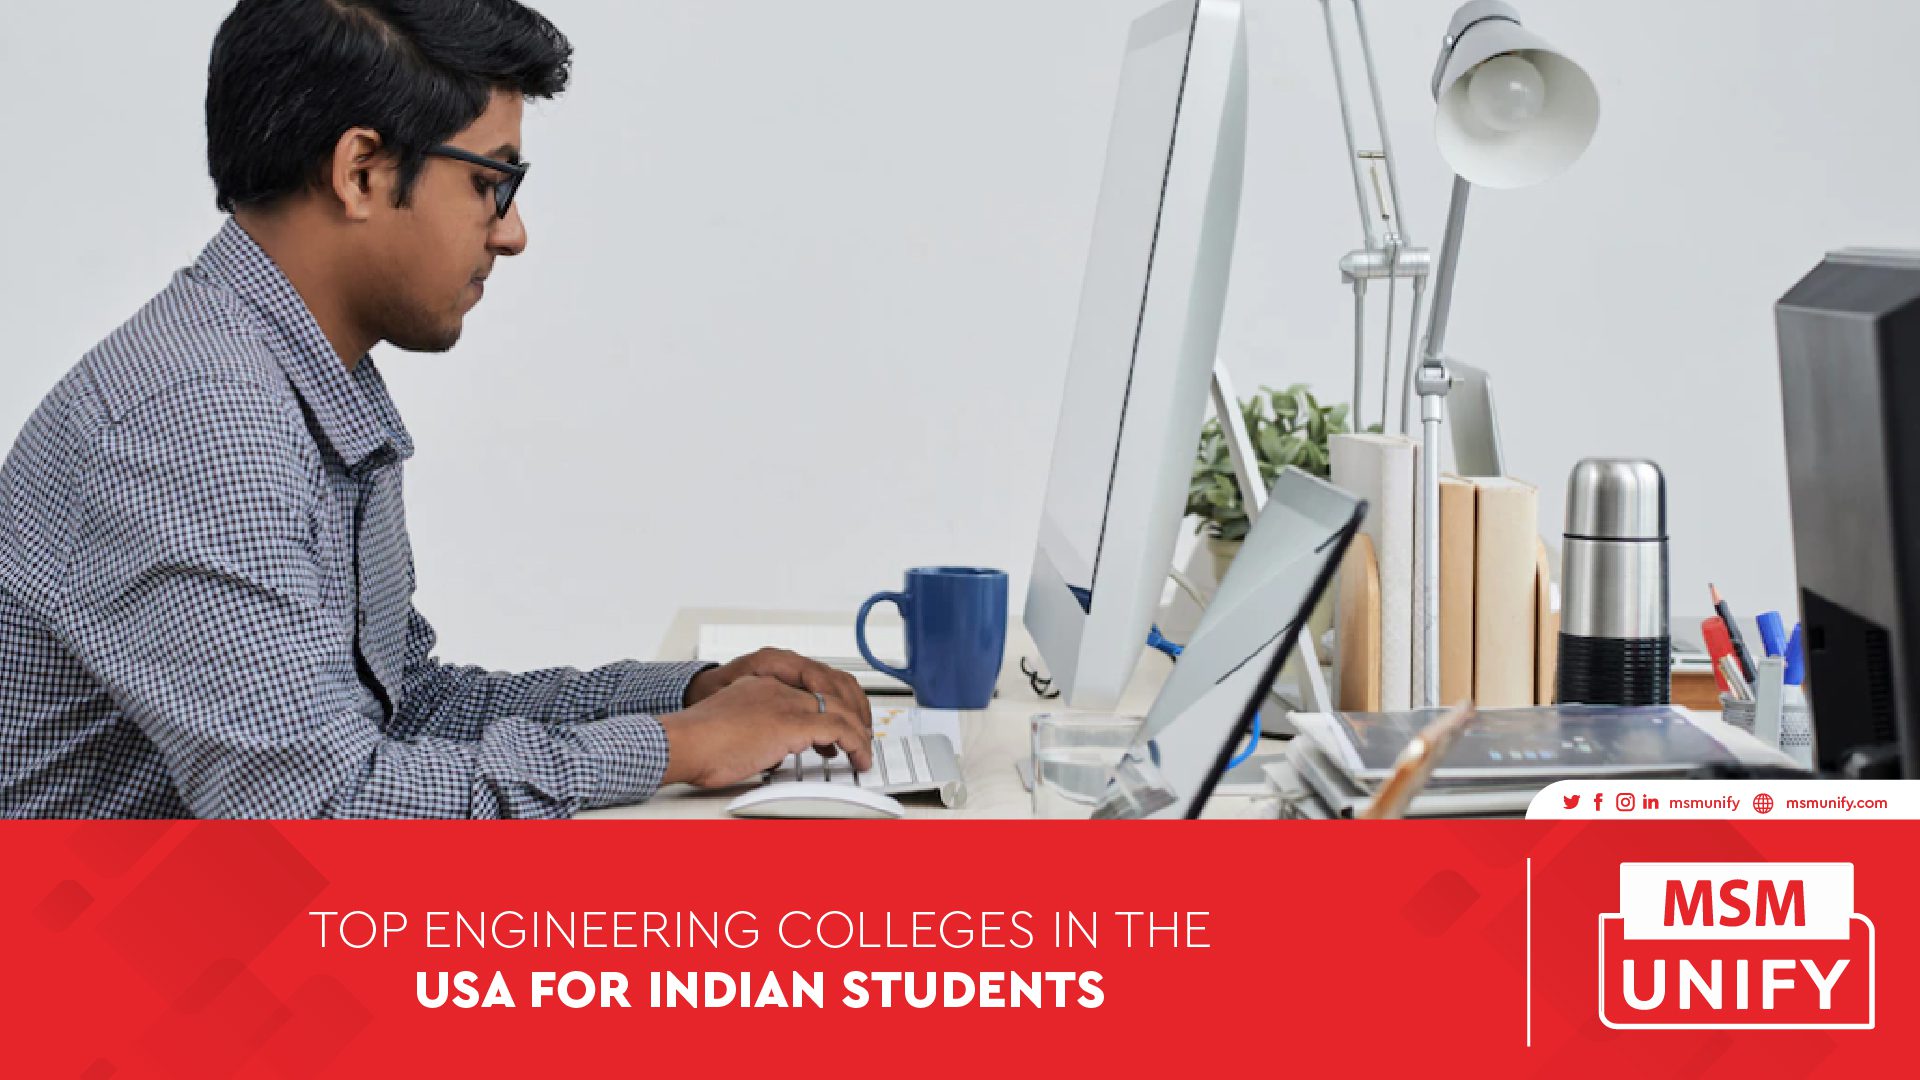 Top Engineering Colleges in the USA for Indian Students MSM Unify